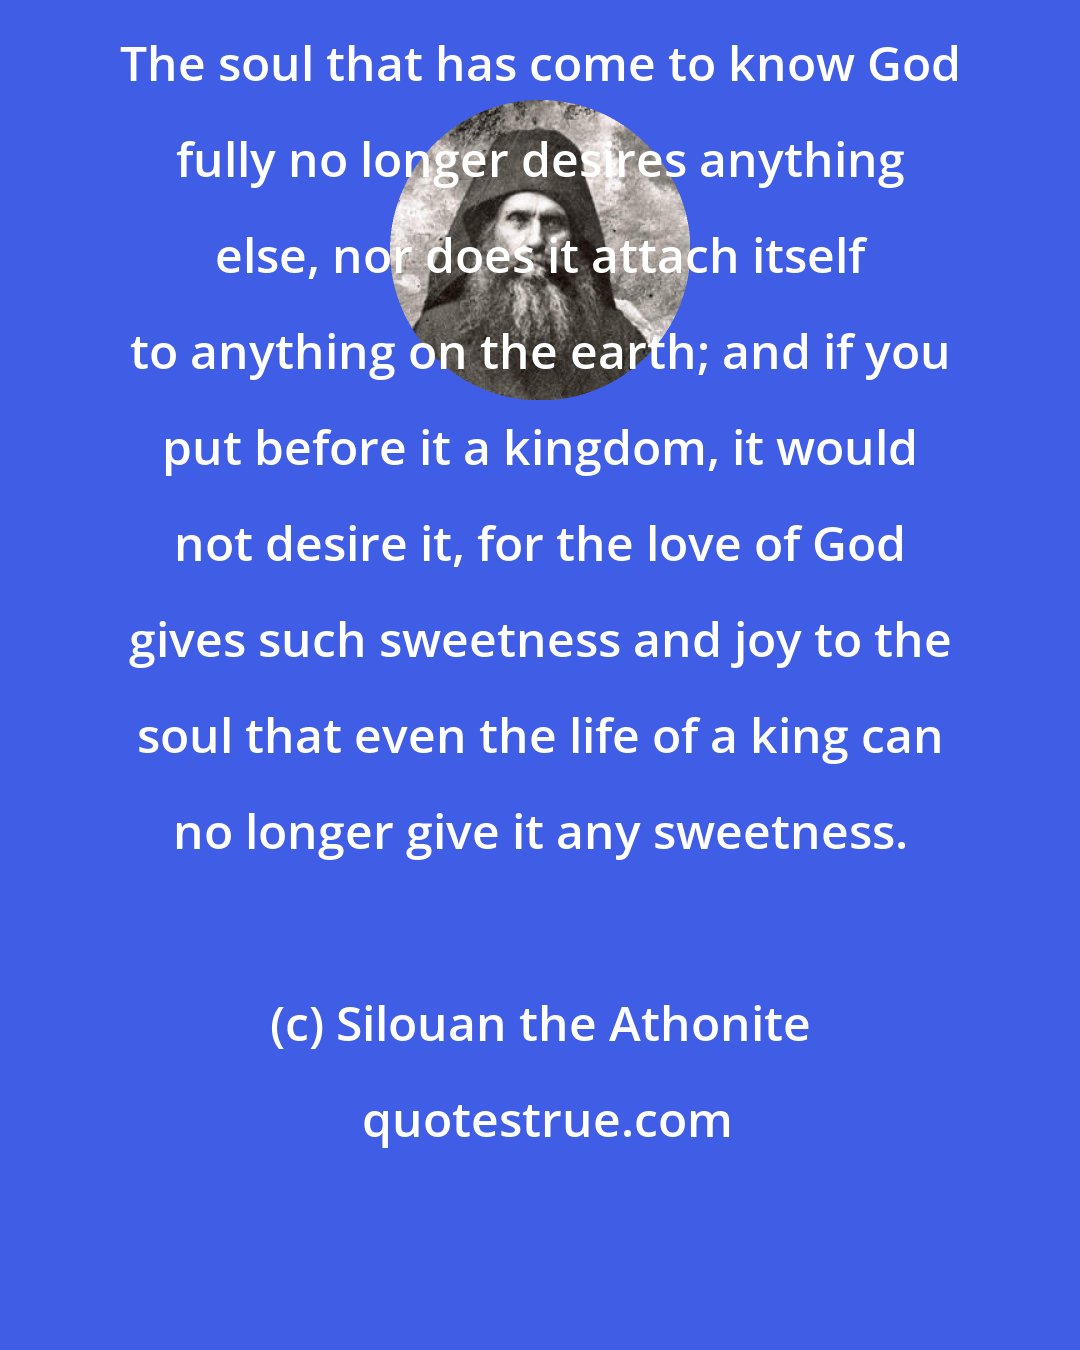 Silouan the Athonite: The soul that has come to know God fully no longer desires anything else, nor does it attach itself to anything on the earth; and if you put before it a kingdom, it would not desire it, for the love of God gives such sweetness and joy to the soul that even the life of a king can no longer give it any sweetness.